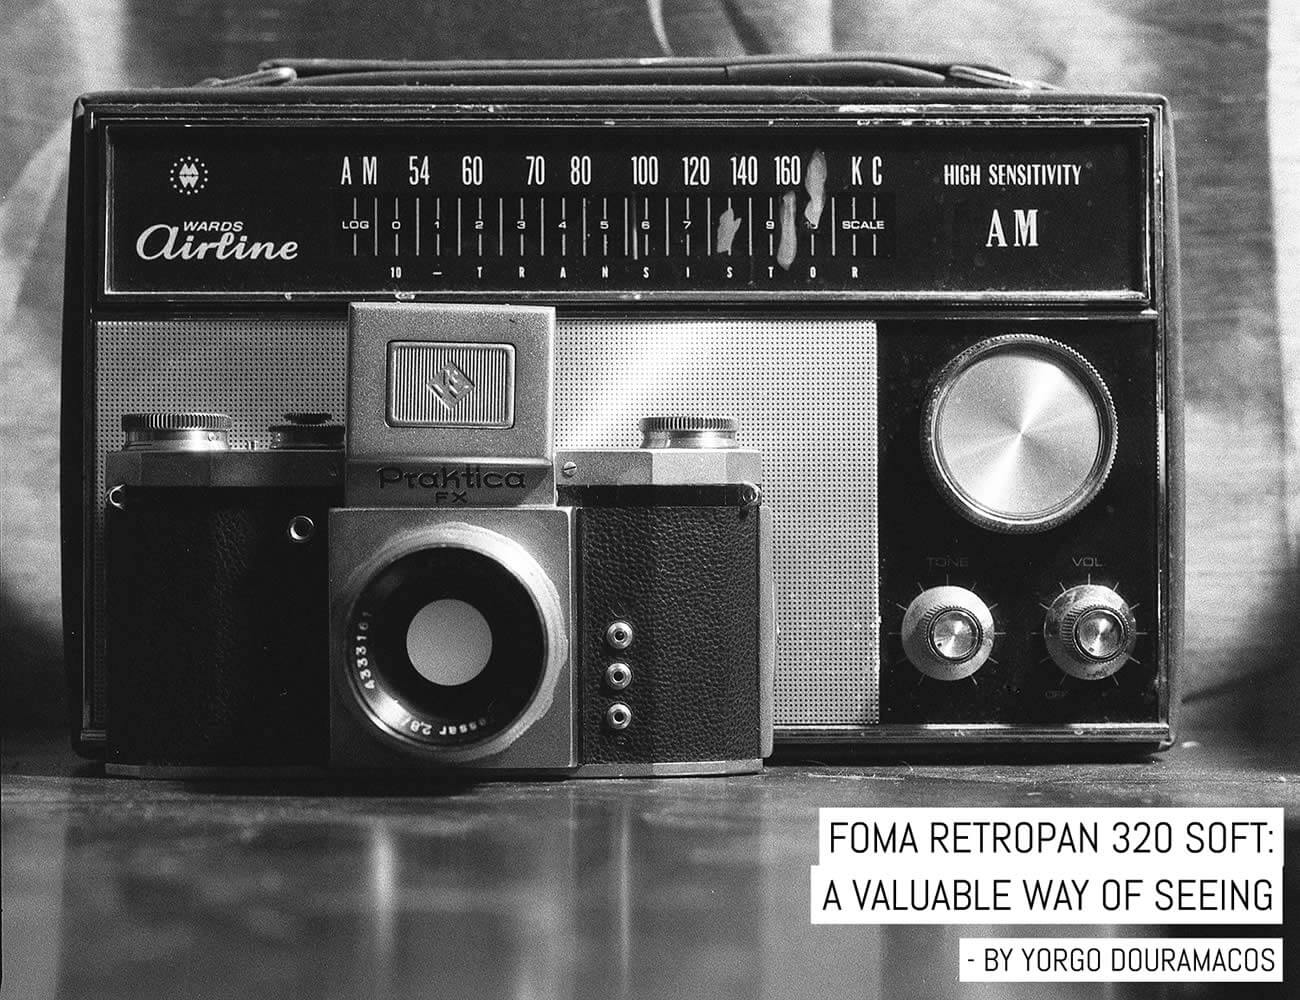 Foma Retropan 320 Soft: A valuable way of seeing